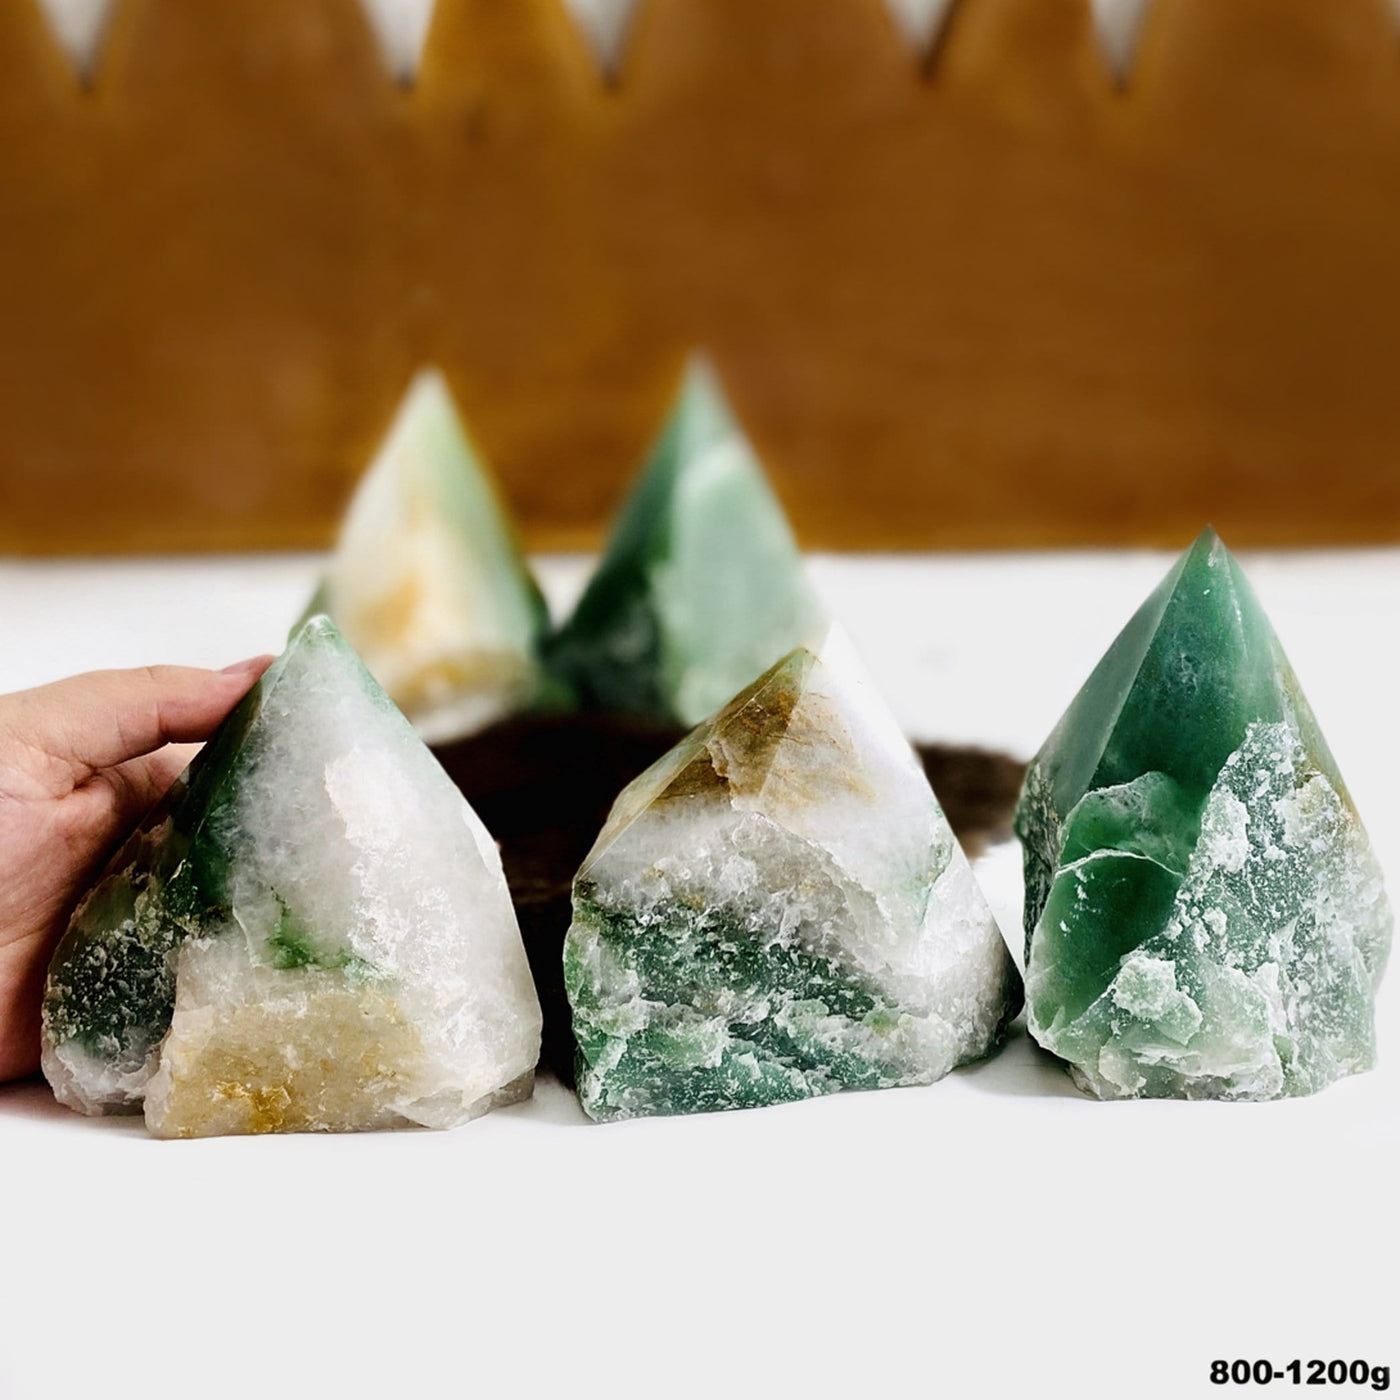 Assortment of green and white quartz semi polished points.  They are polished on top and rough along the sides.  They have a cut base so they can stand on their own.